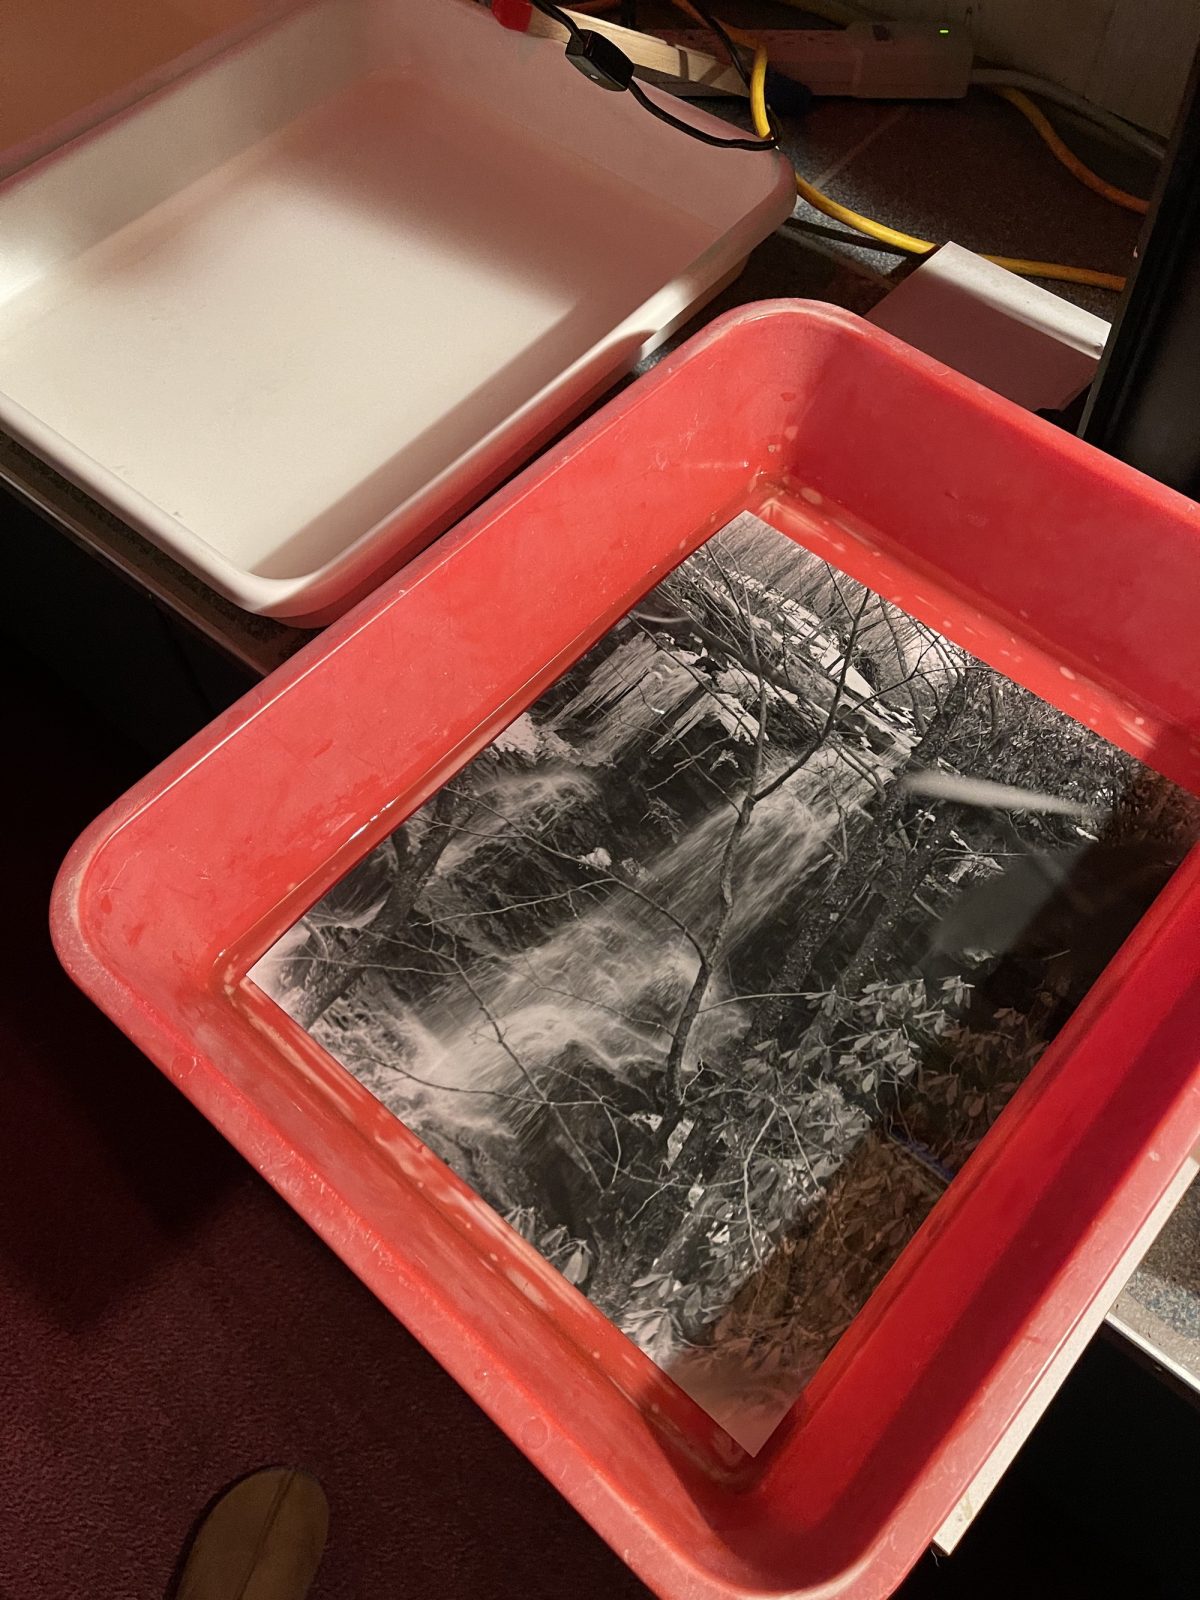 An 11x14 print of a waterfall is soaking.